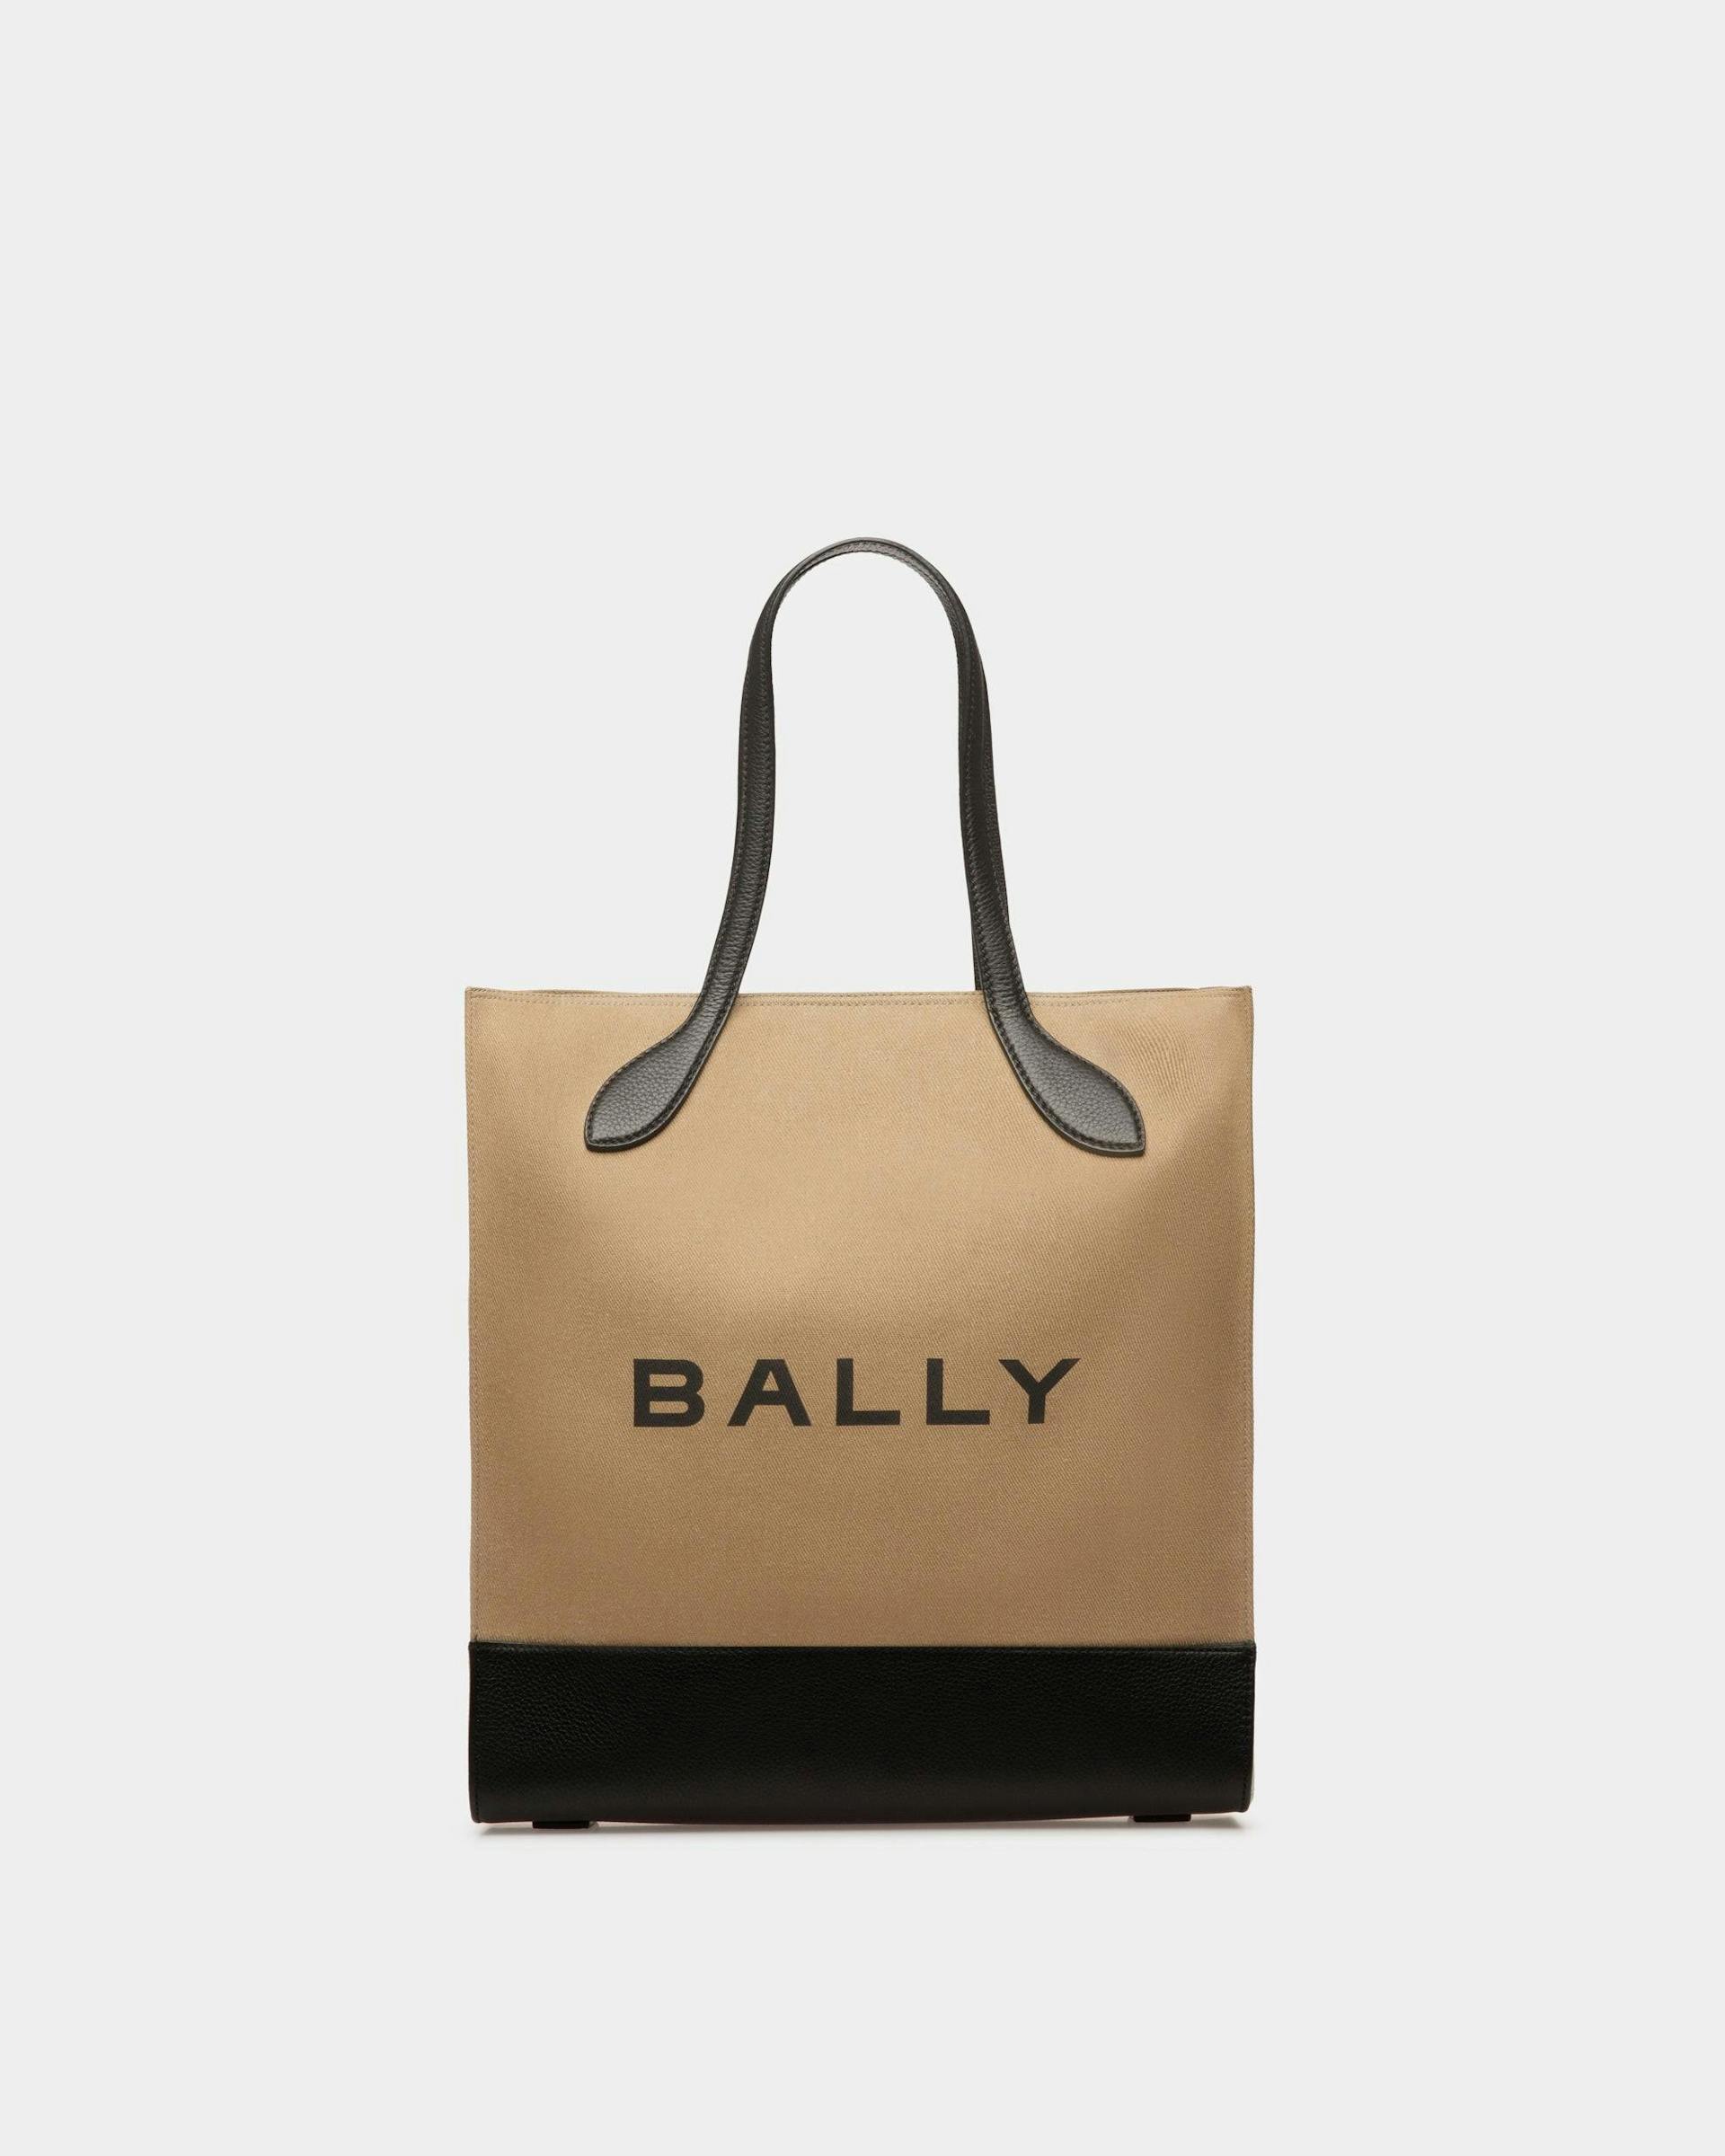 Bar Tote Bag In Sand And Black Fabric - Women's - Bally - 01